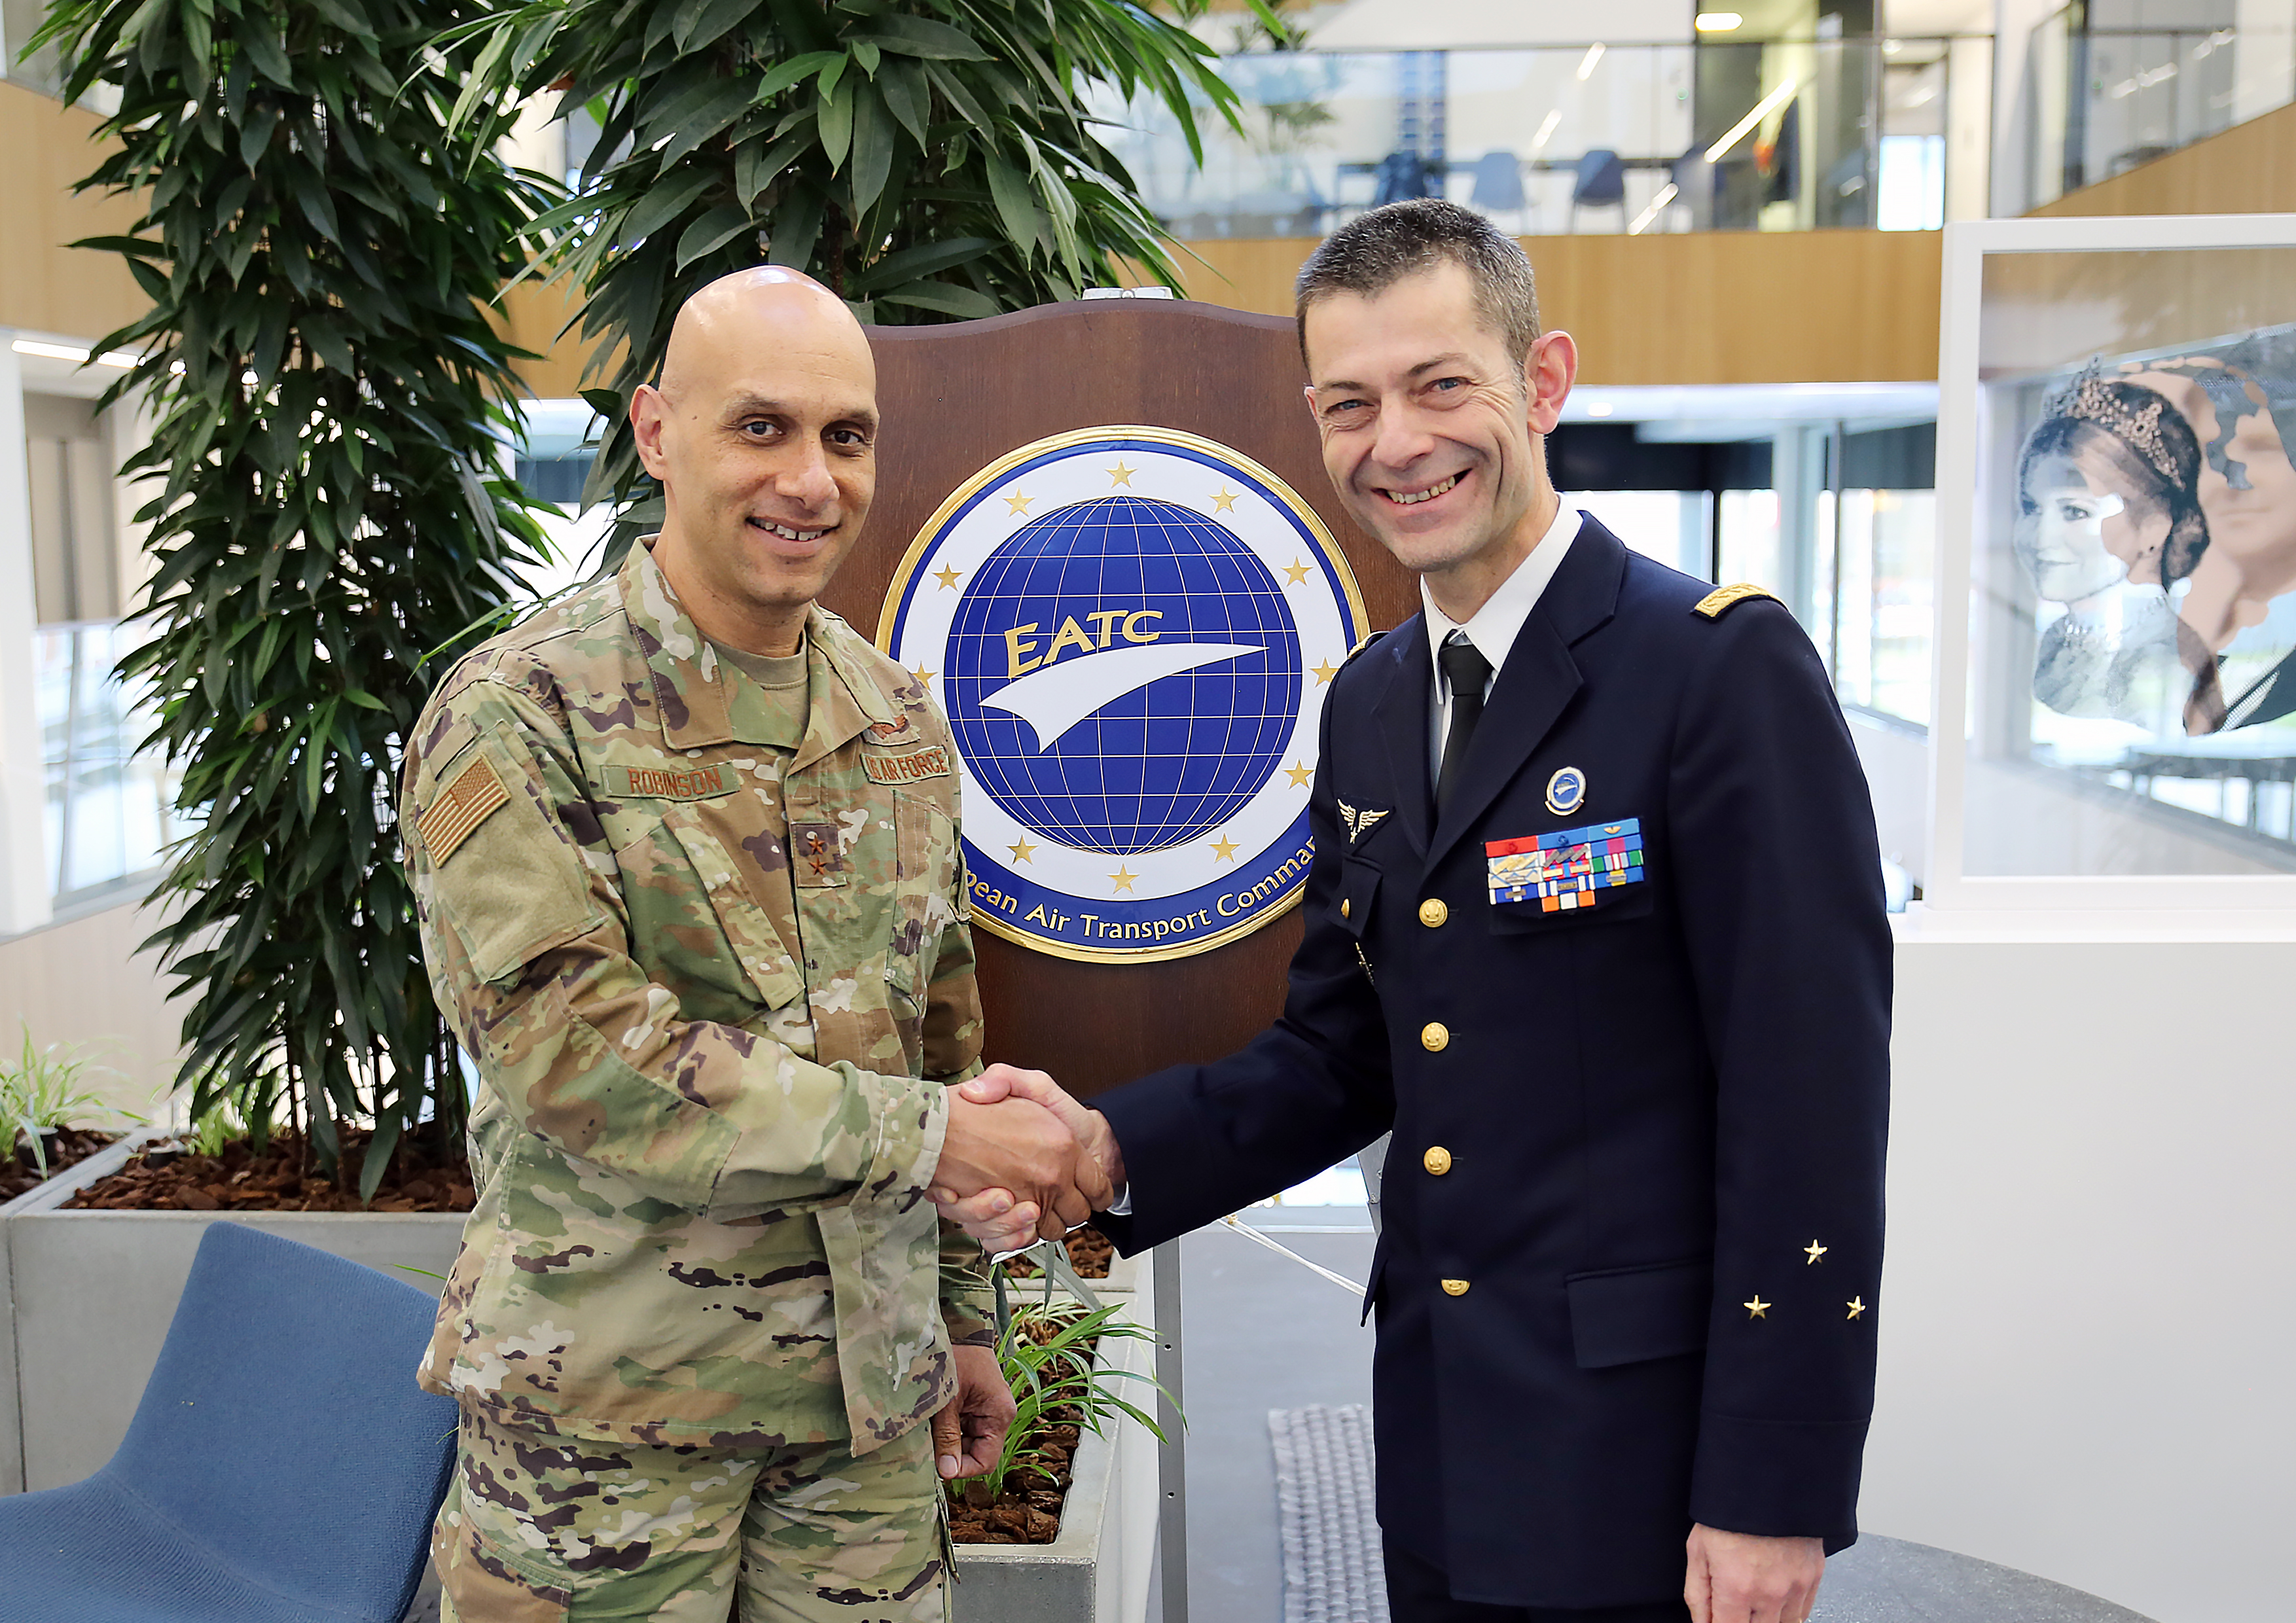 The Director of operations, US Transportation Command, visits EATC.